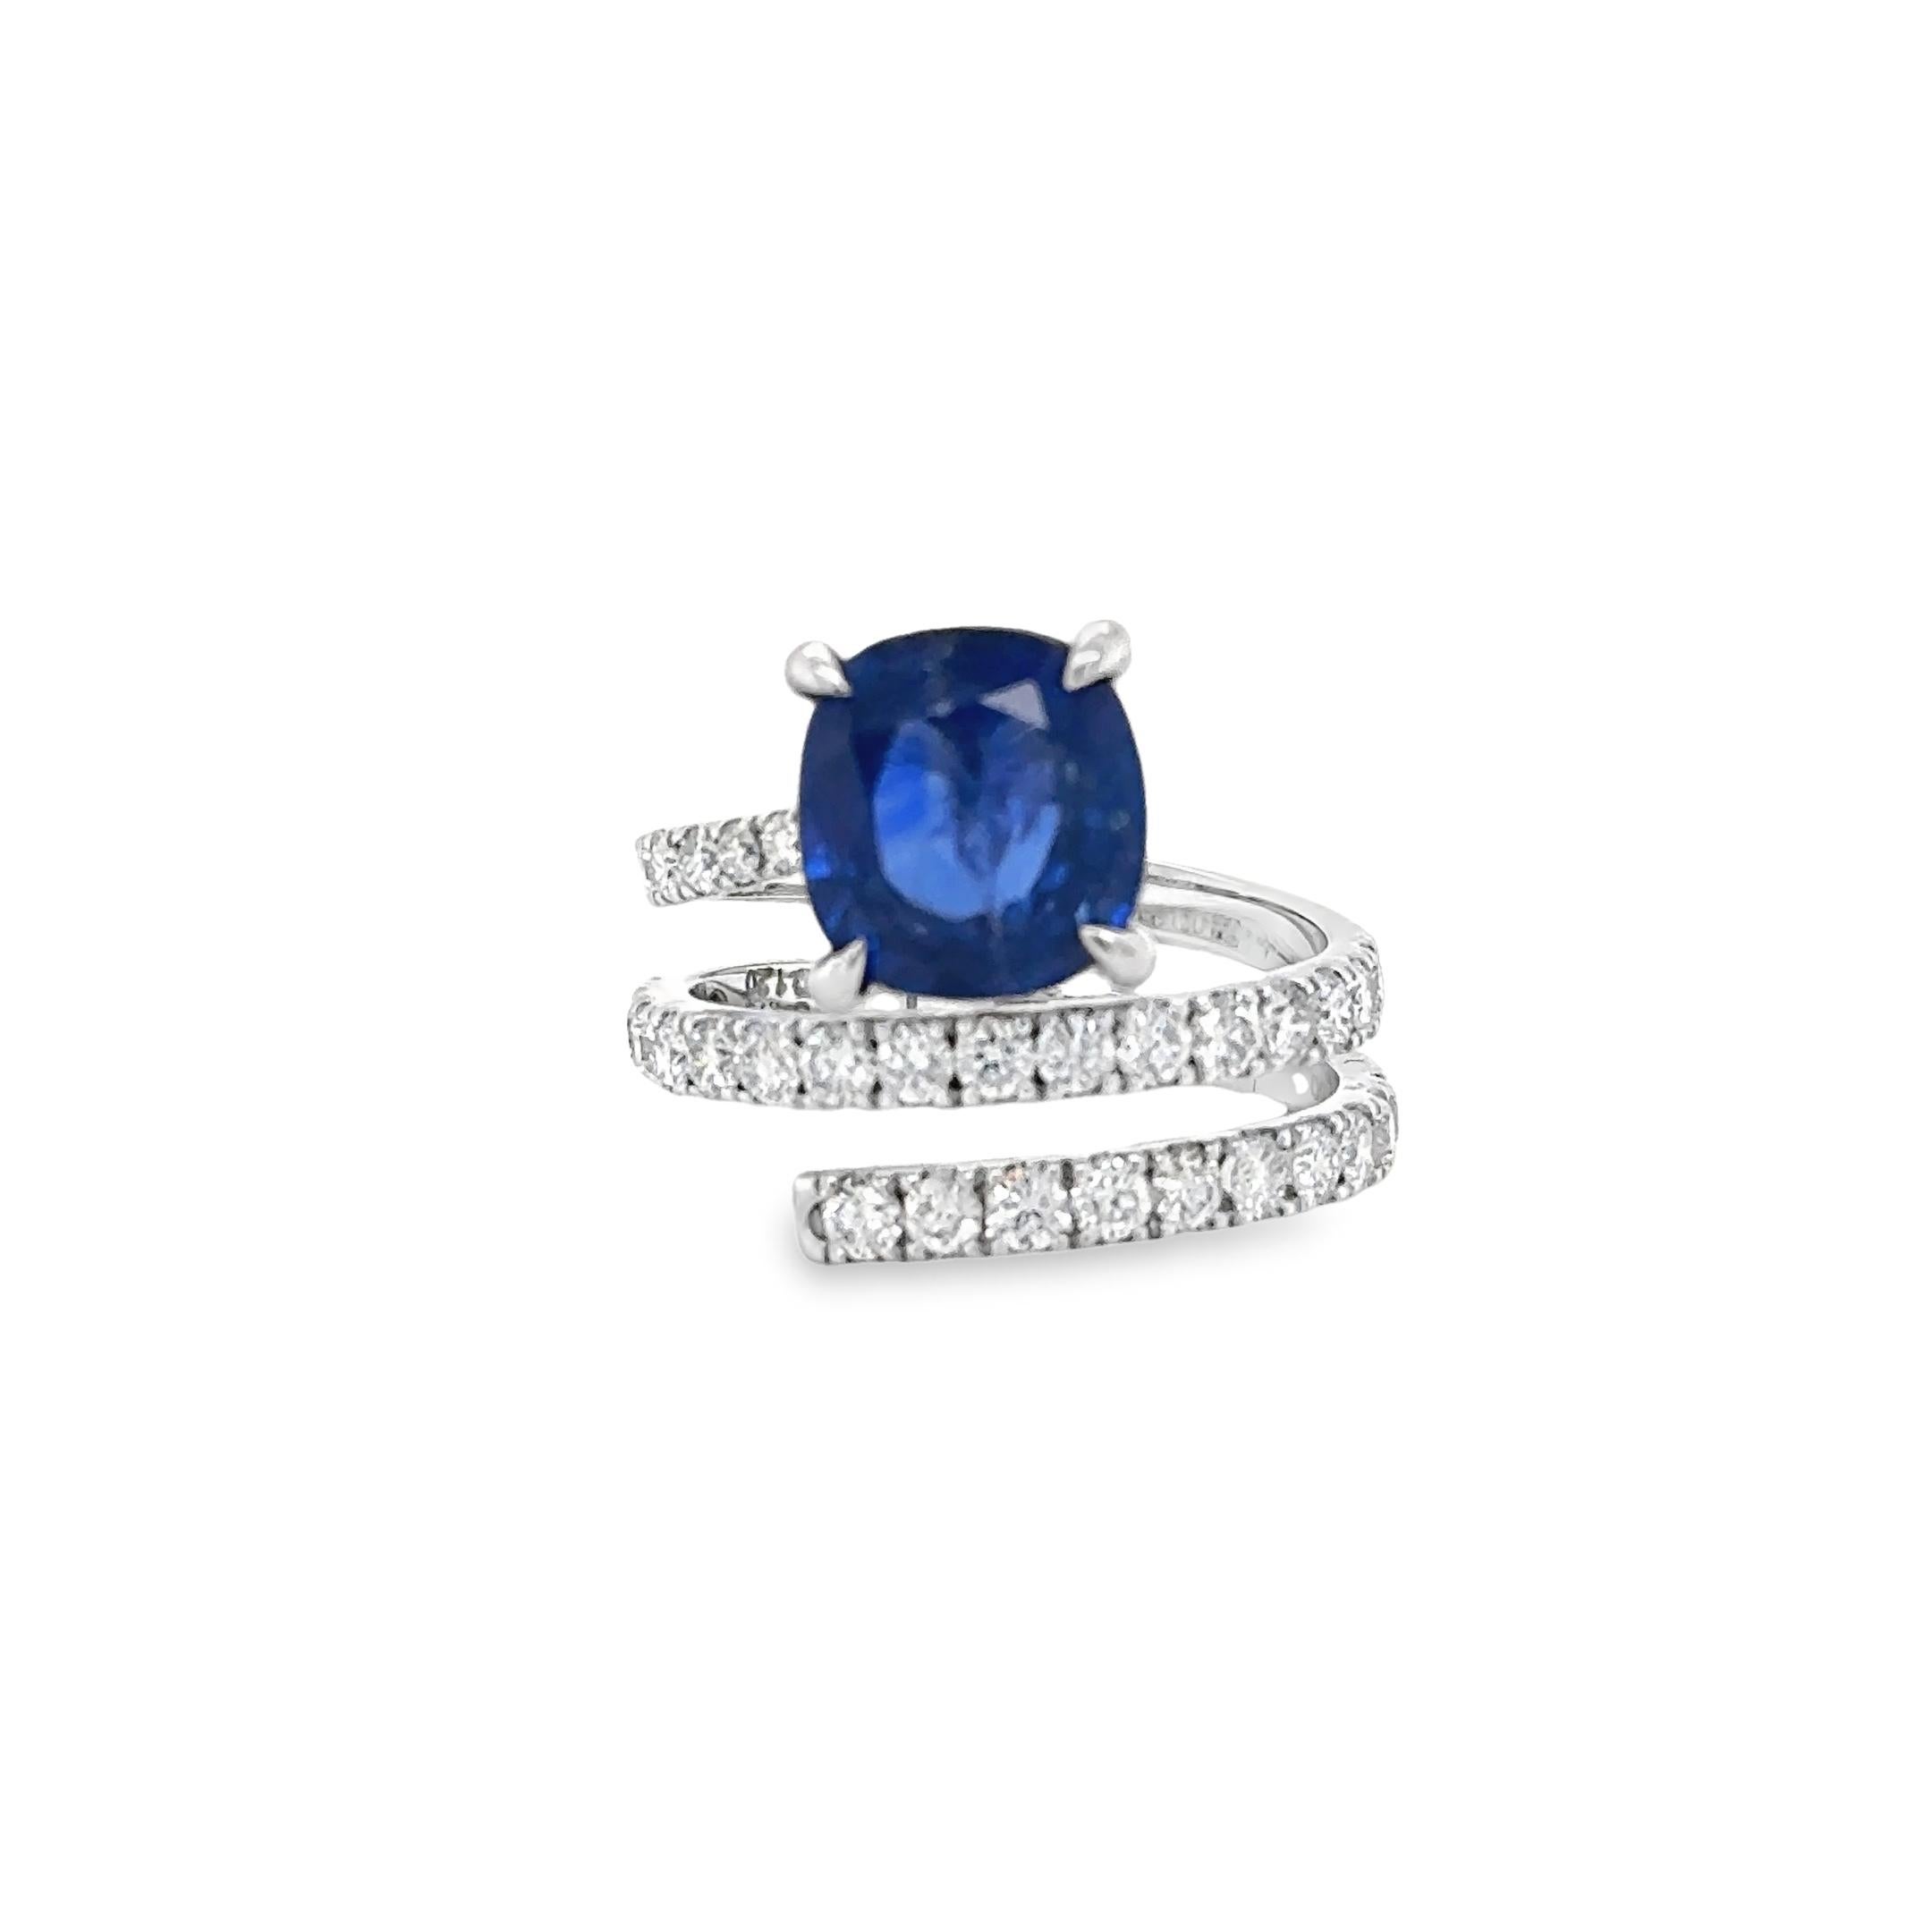 This Stunning Stacked Diamond and Blue Sapphire Ring is set with One Cushion mixed cut natural Sapphire and Thirty Six round brilliant cut natural Diamonds. 

DETAILS :

✦Centre : Natural Blue Sapphire : 4.78cts

✦ Origin : Sri Lanka (certified)

✦